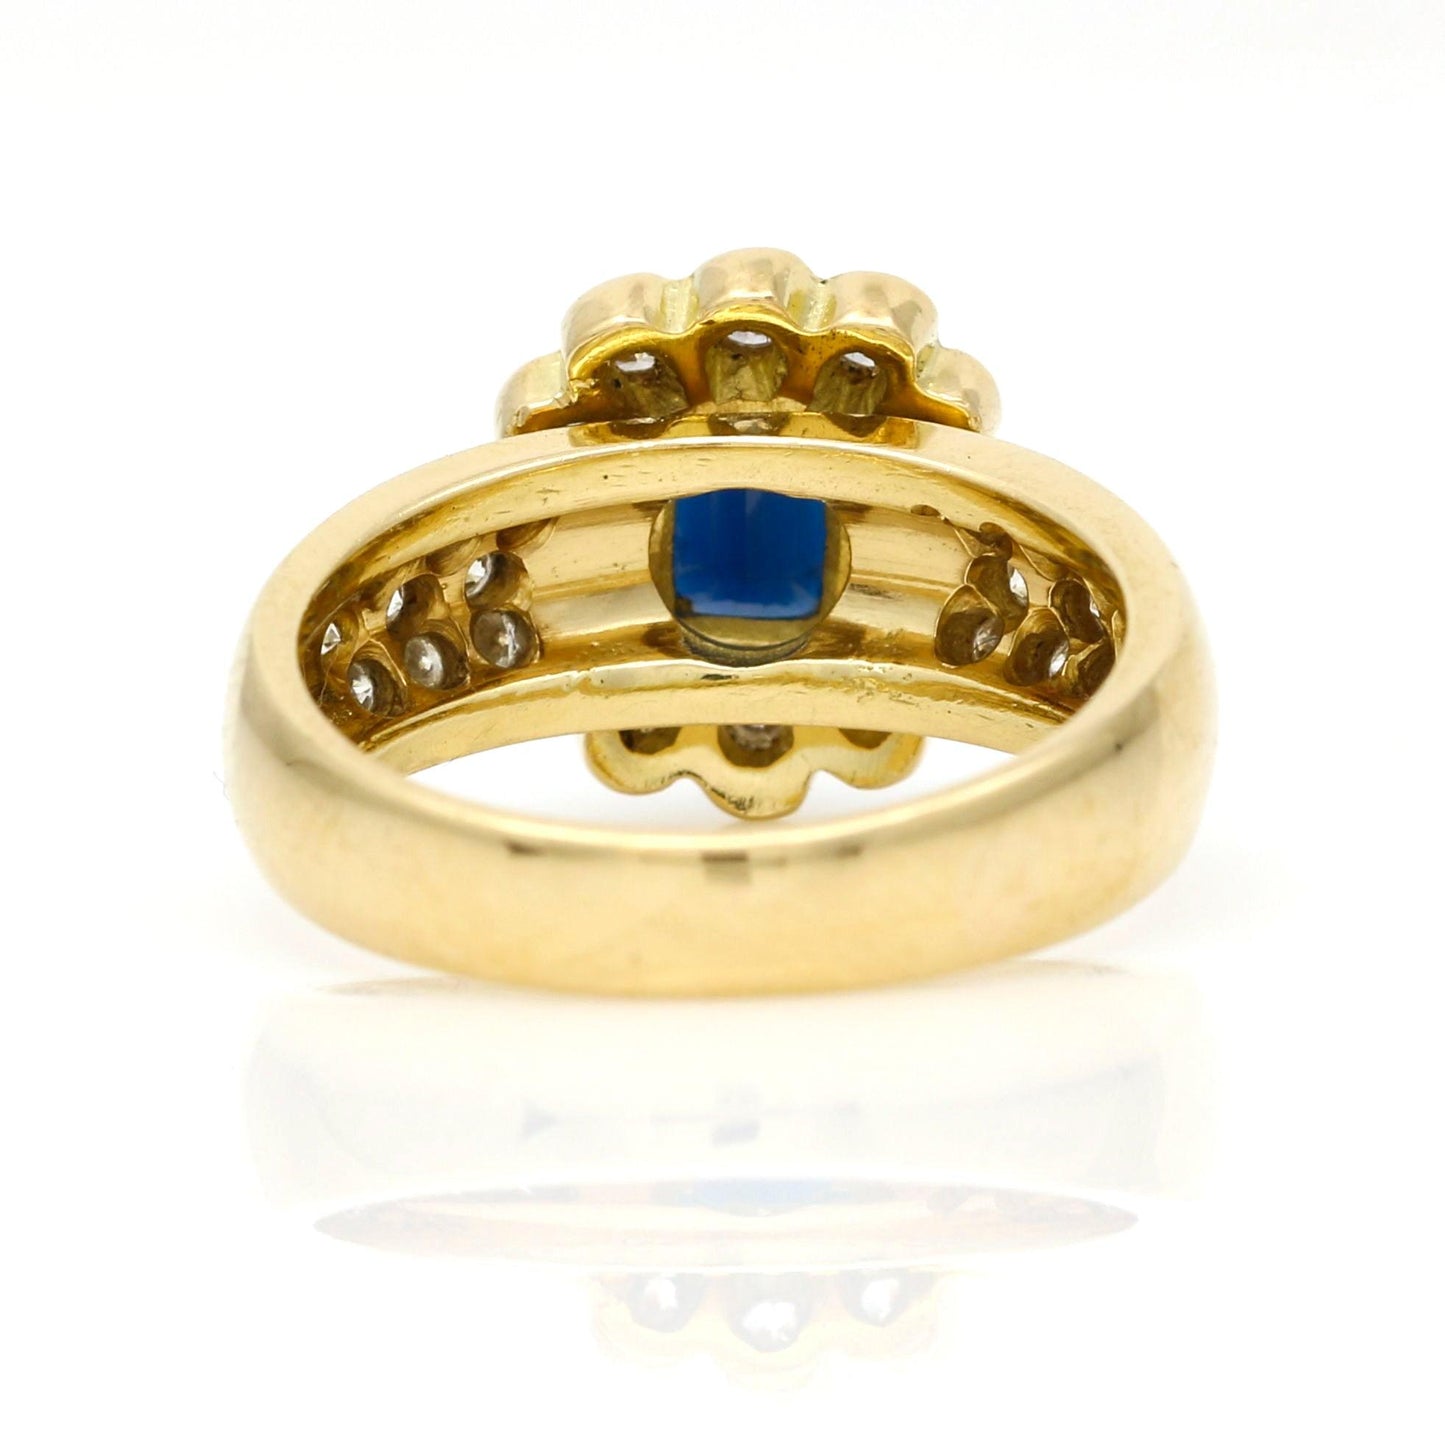 Vintage Blue Sapphire and Diamond Cocktail Ring in 18k Yellow Gold - 31 Jewels Inc.